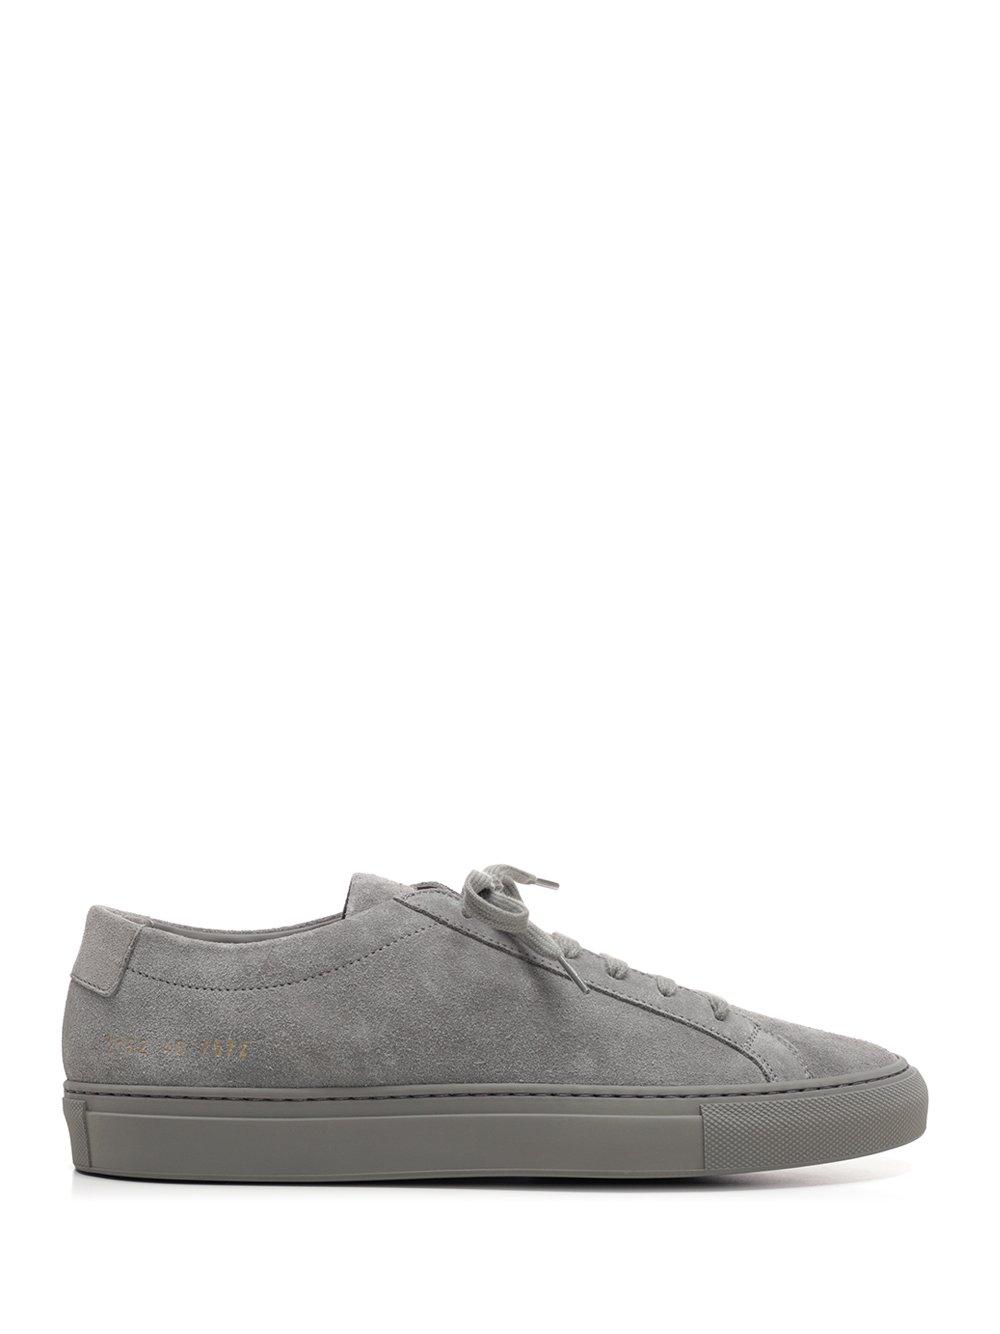 Common Projects Achilles Grey Suede Sneakers in Gray for Men | Lyst